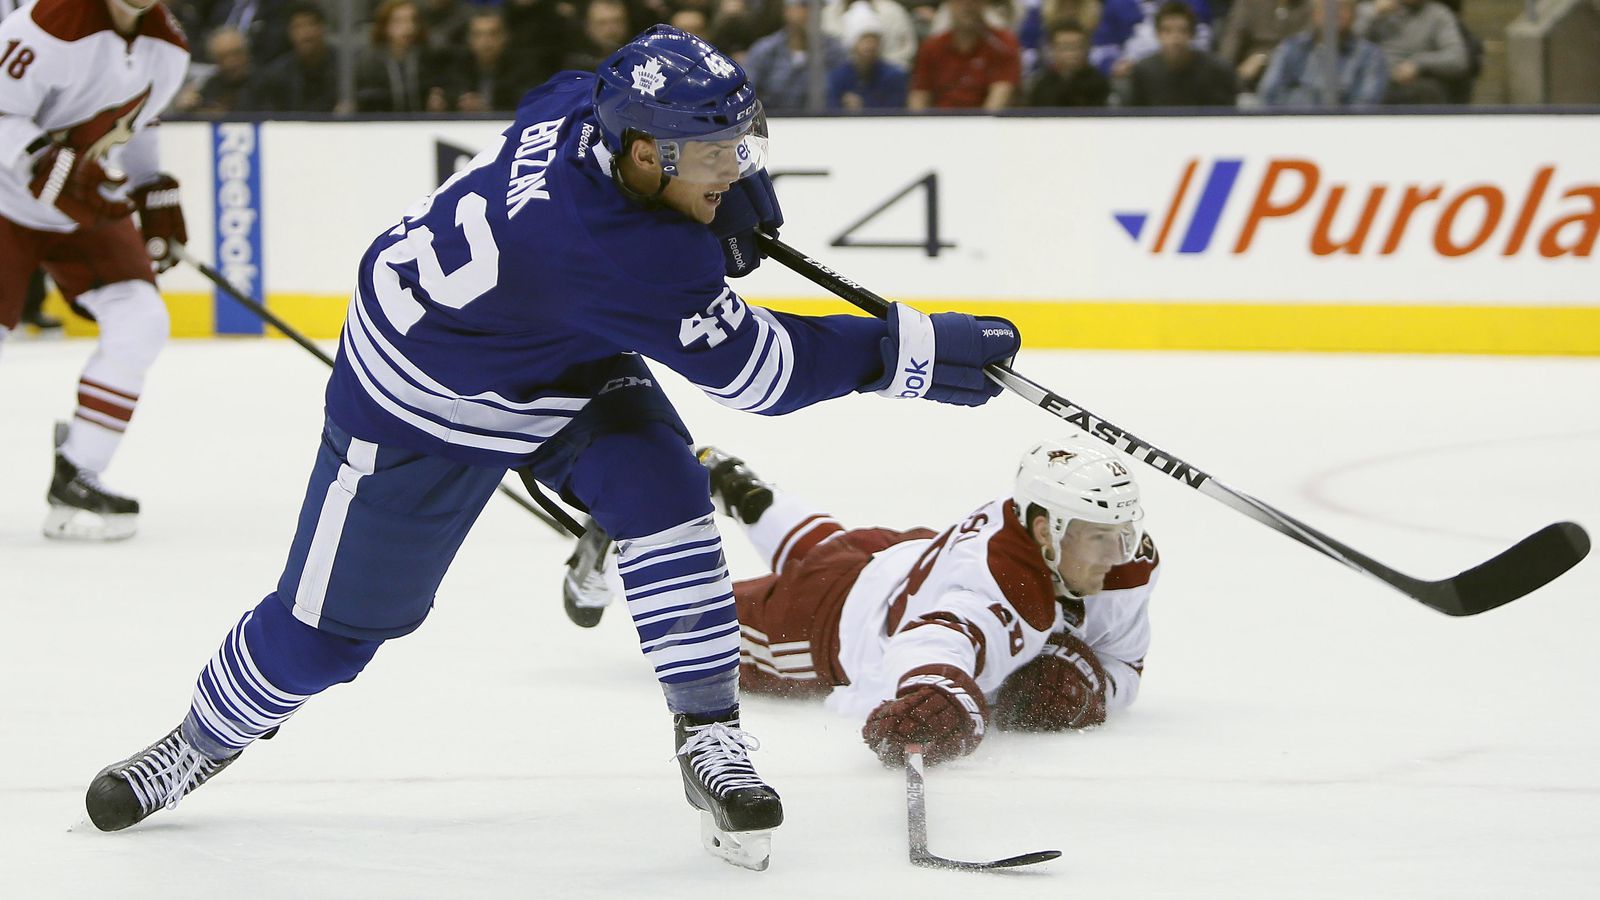 Arizona Coyotes still interested in Tyler Bozak, according to Darren Dreger - Five for Howling